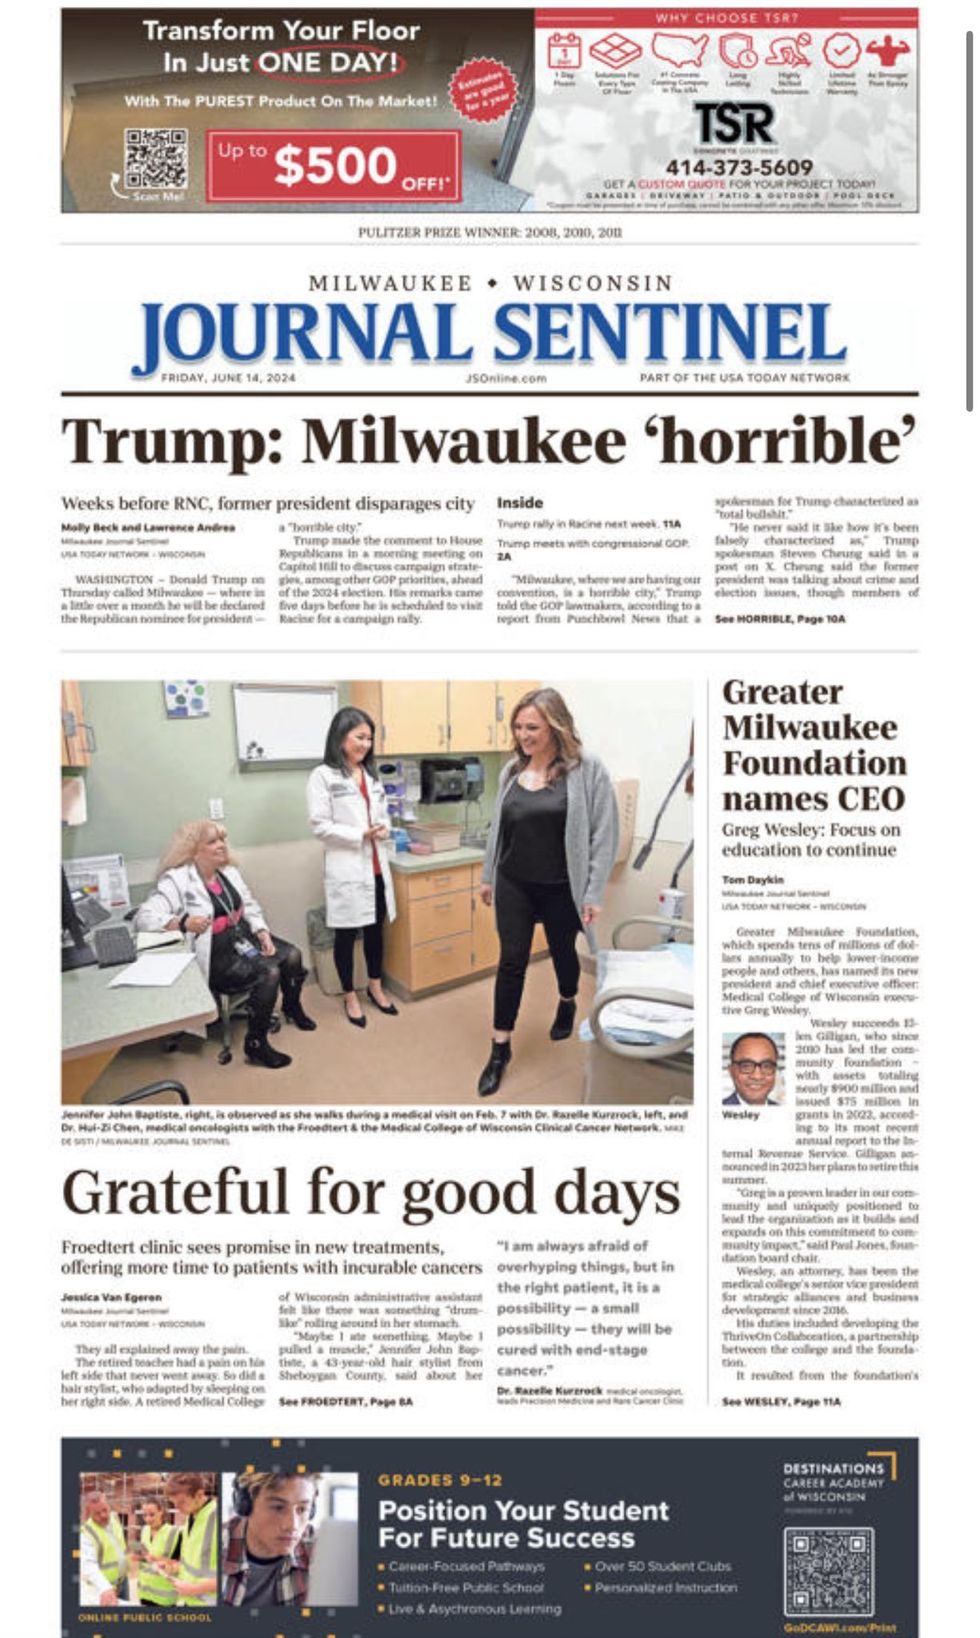 Front page of Milwaukee Journal Sentinel featuring Trump's derogatory remarks about Milwaukee